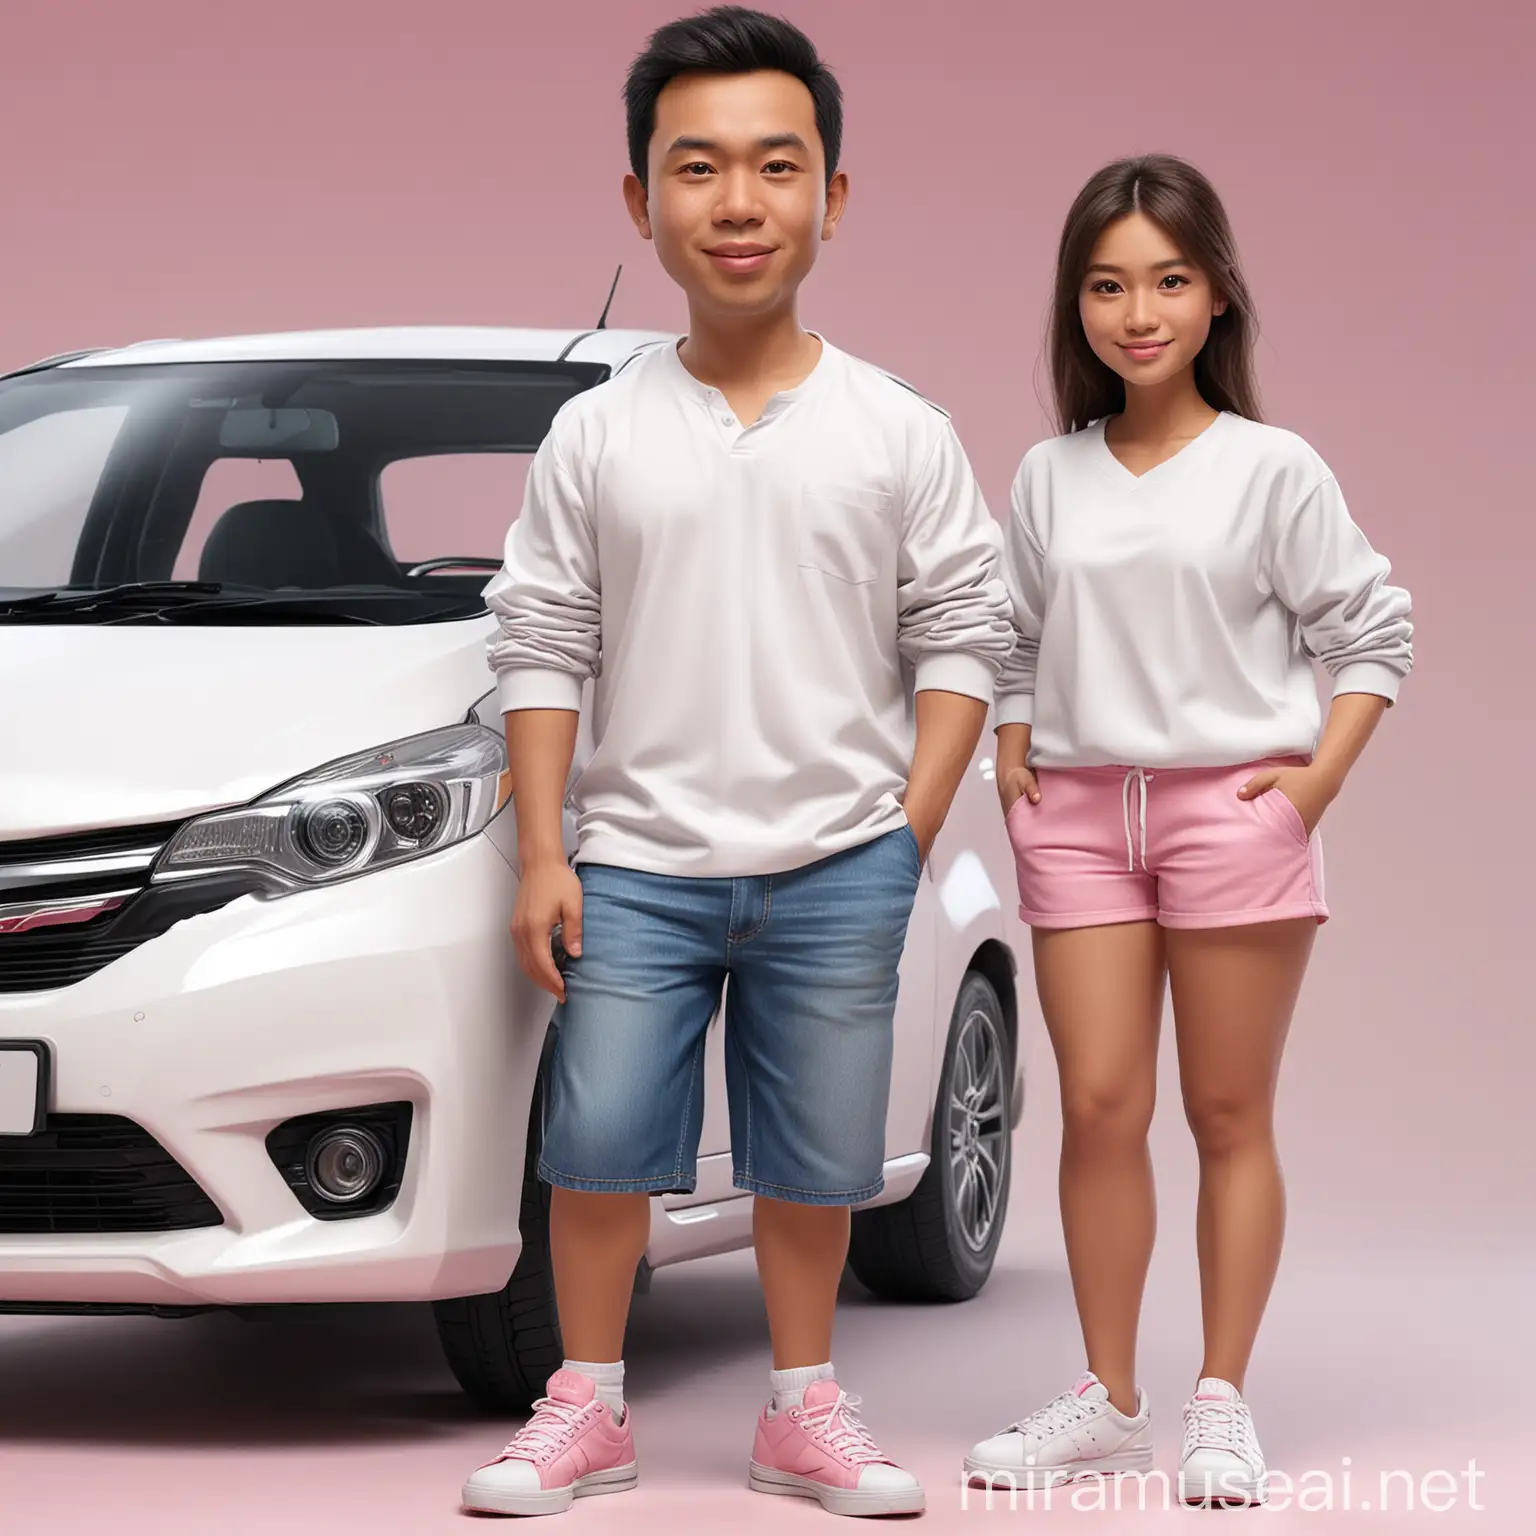 Realistic 4D Caricature of Indonesian Man and Girl with Honda Jazz Car